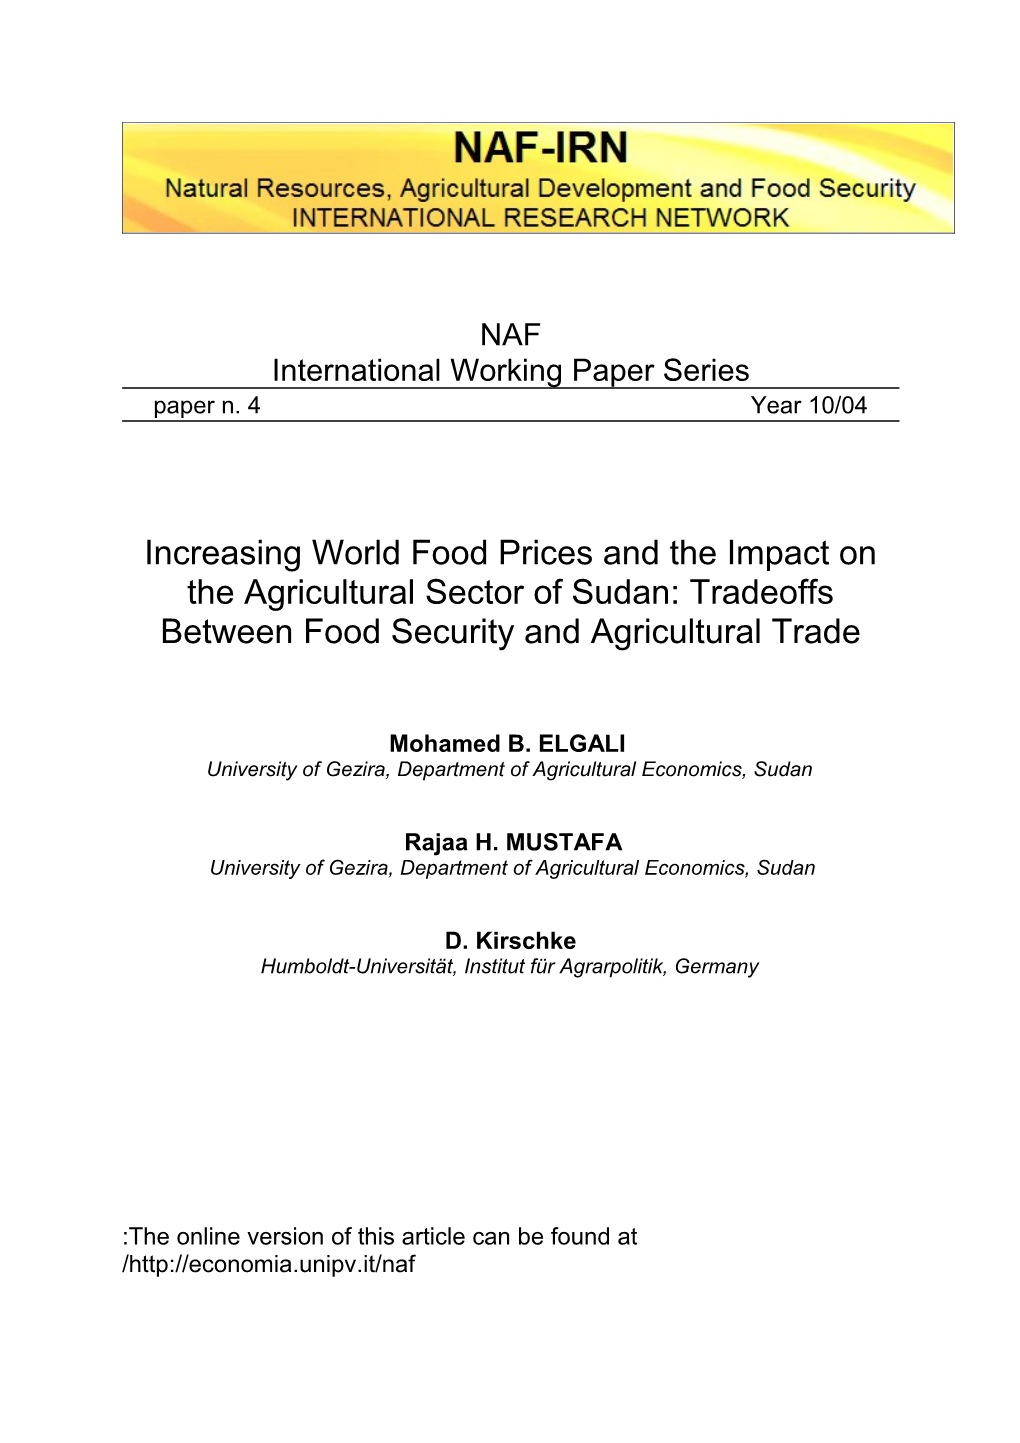 Increasing World Food Prices and the Impact on the Agricultural Sector of Sudan: Tradeoffs